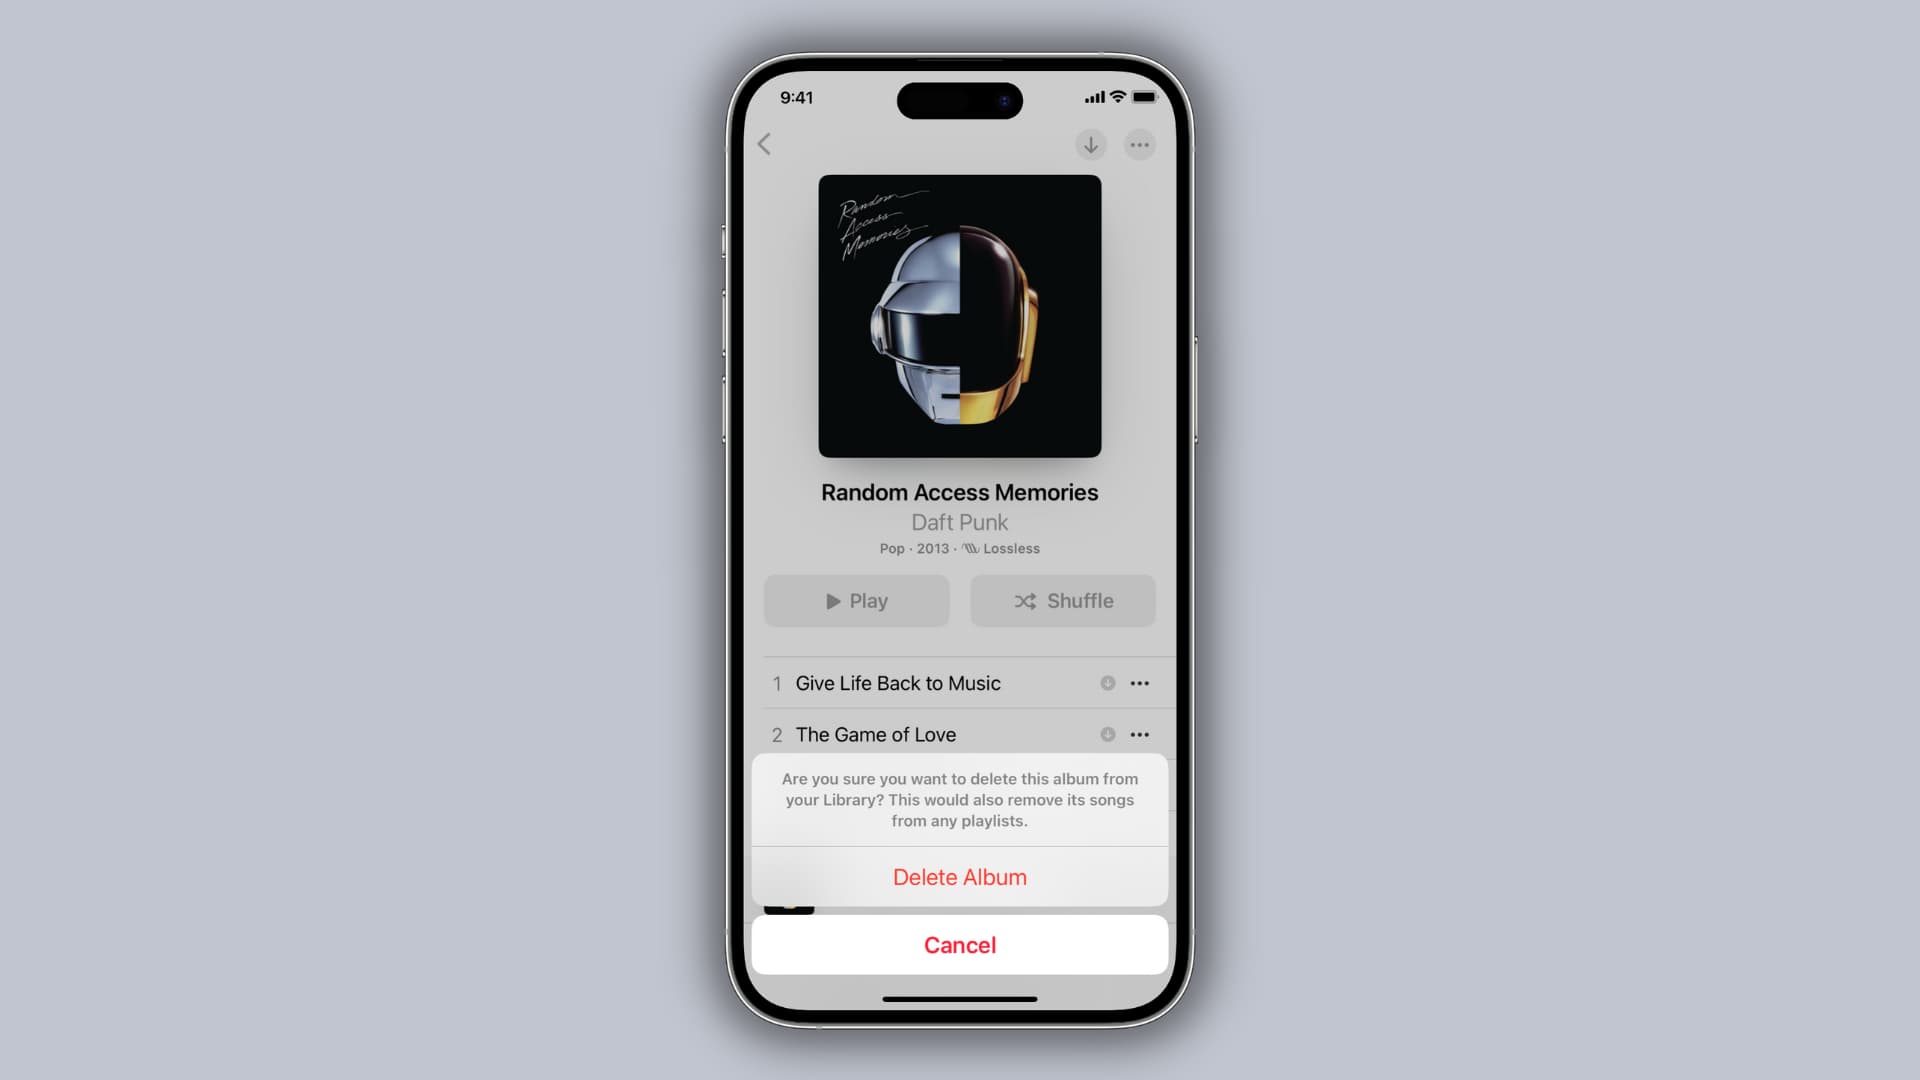 How to delete songs from the Apple Music app